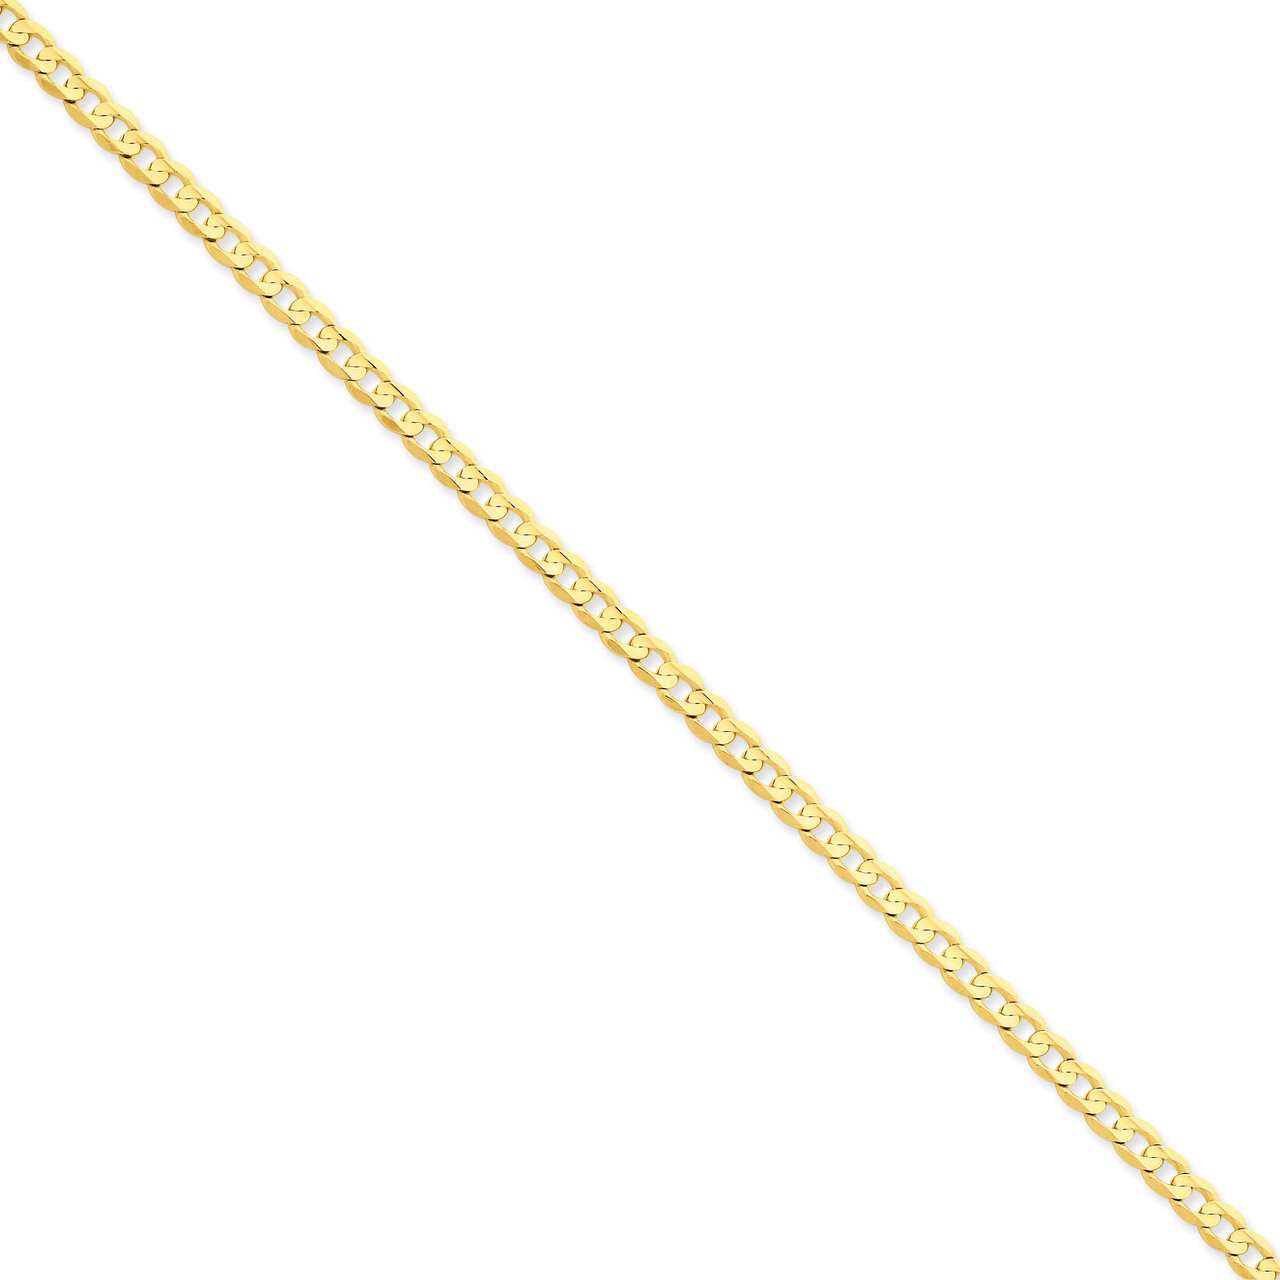 4.5mm Open Concave Curb Chain 18 Inch 14k Gold LCR120-18